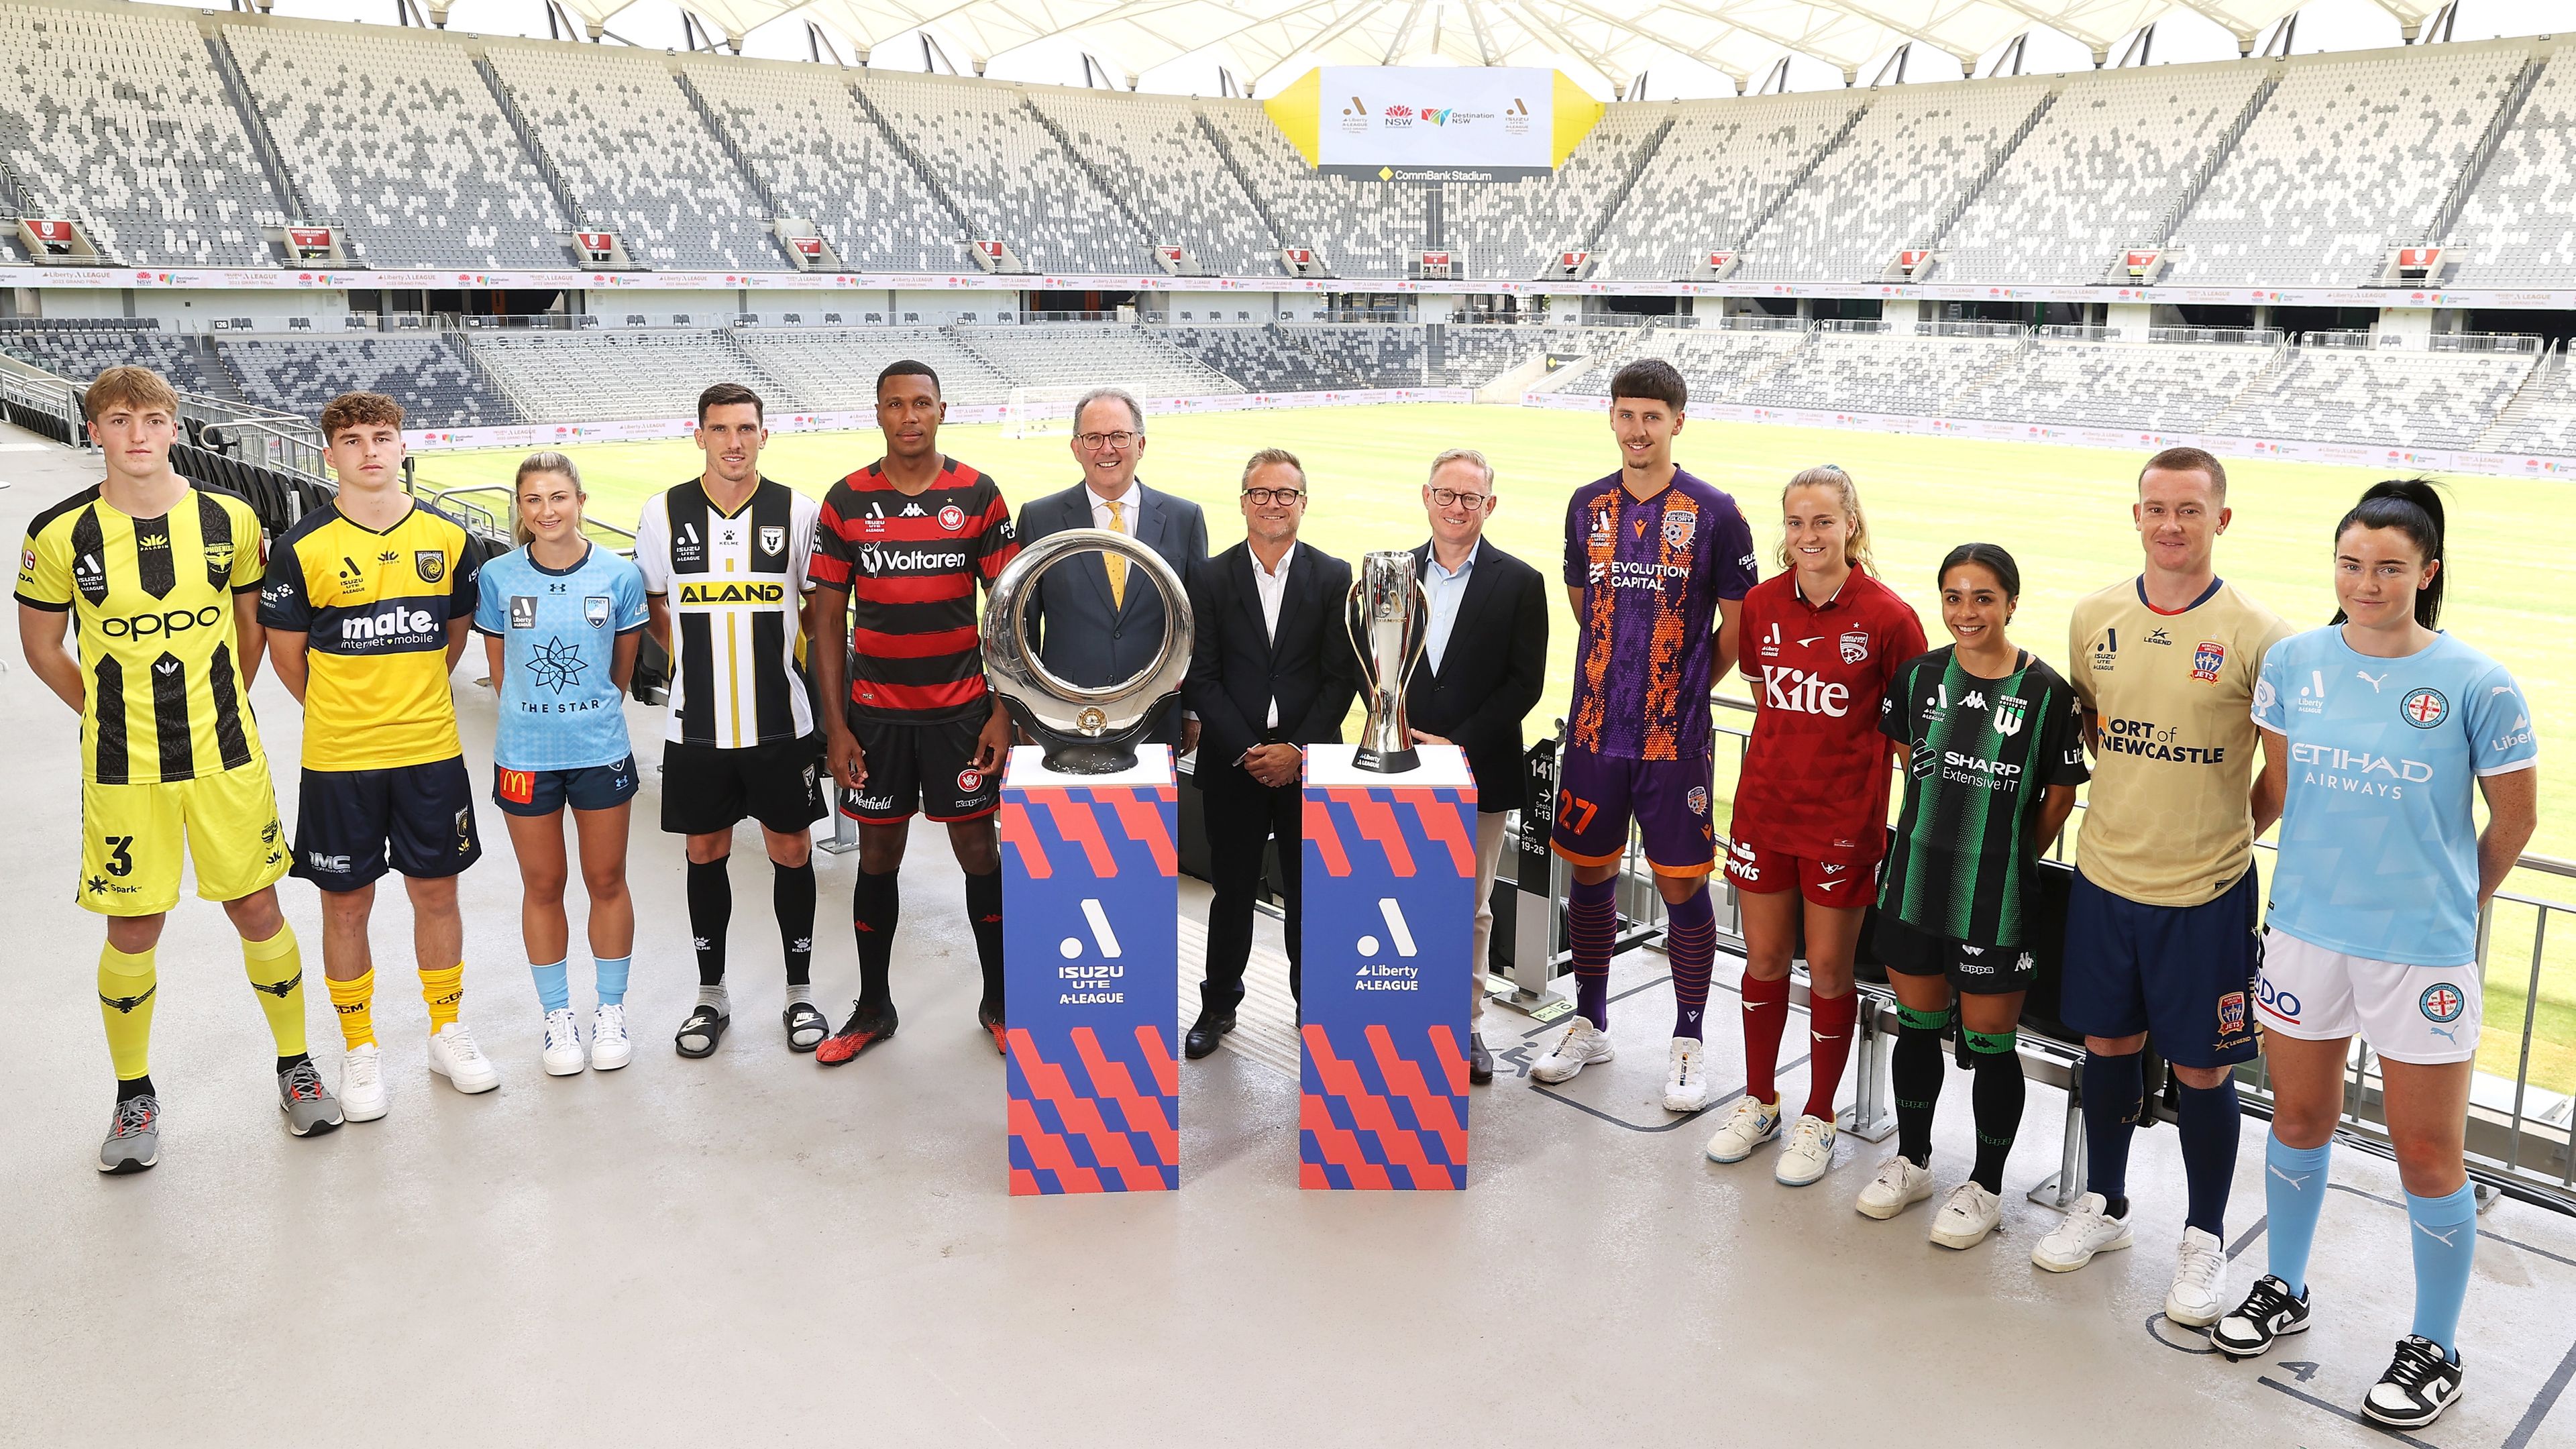 APL director quits as boss Danny Townsend defends 'bold' decision to move A-League grand finals as 'right for the game'